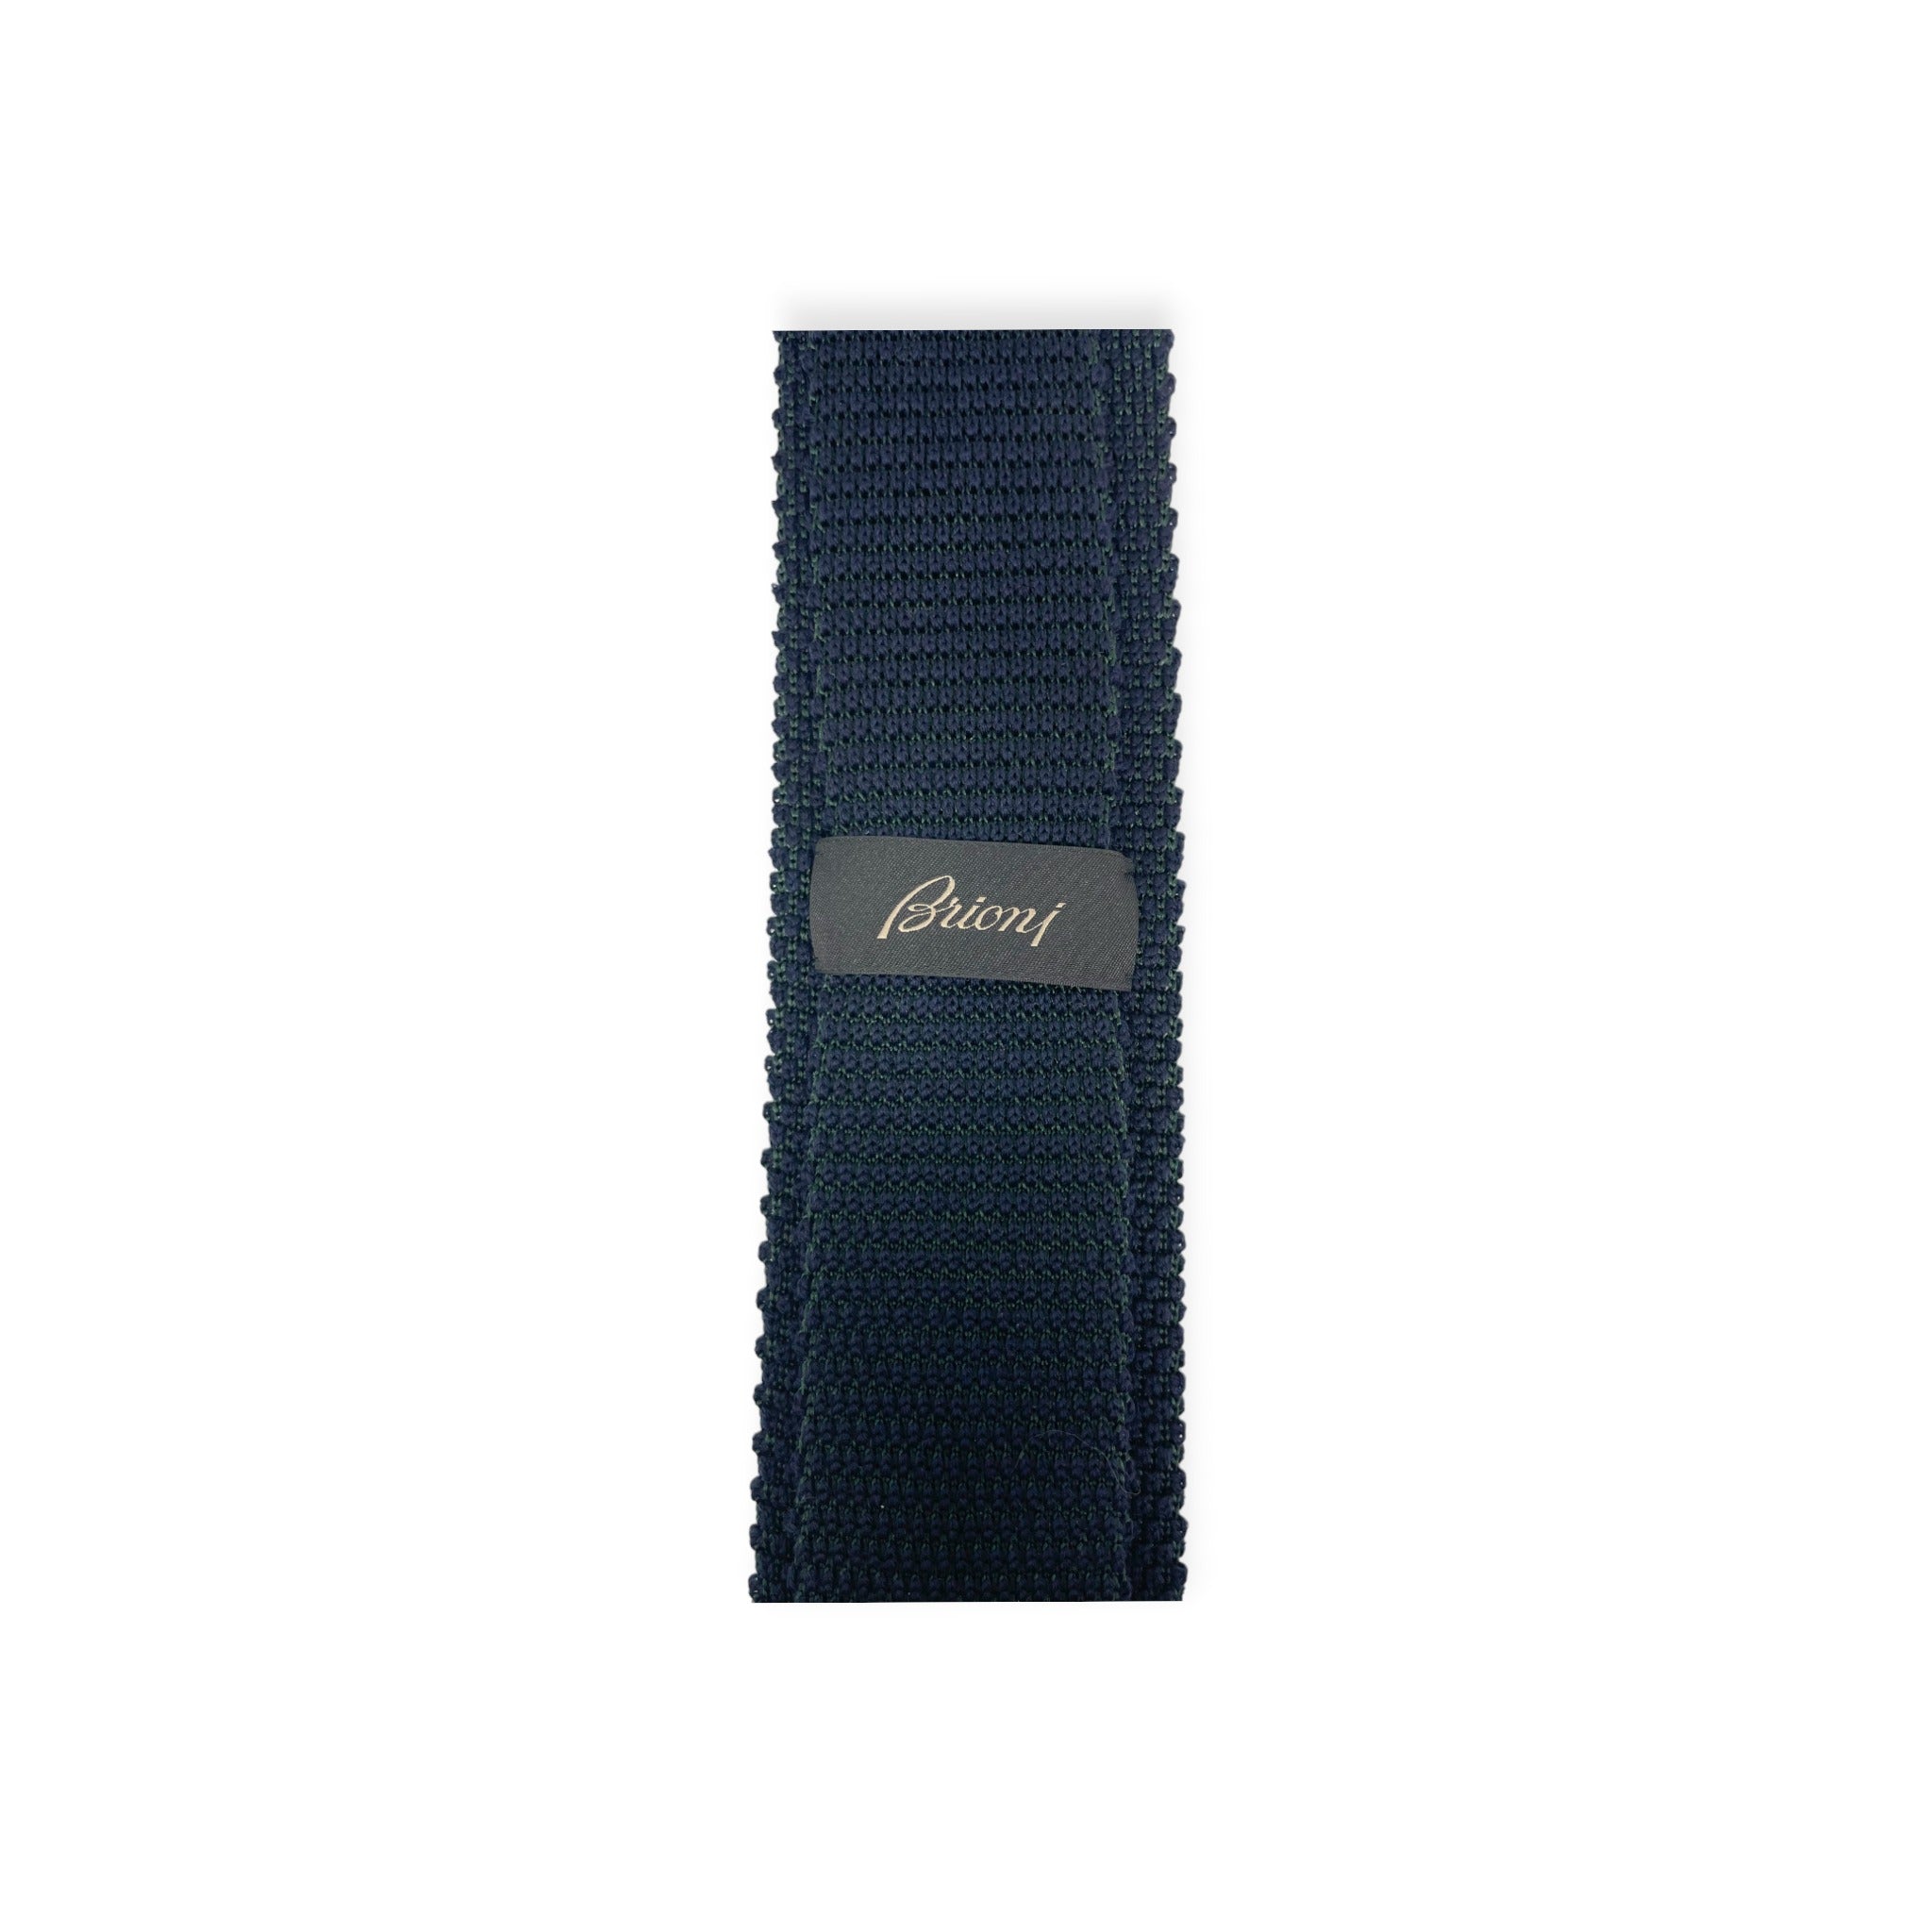 Top down view of blue Brioni knit tricot tie showing label